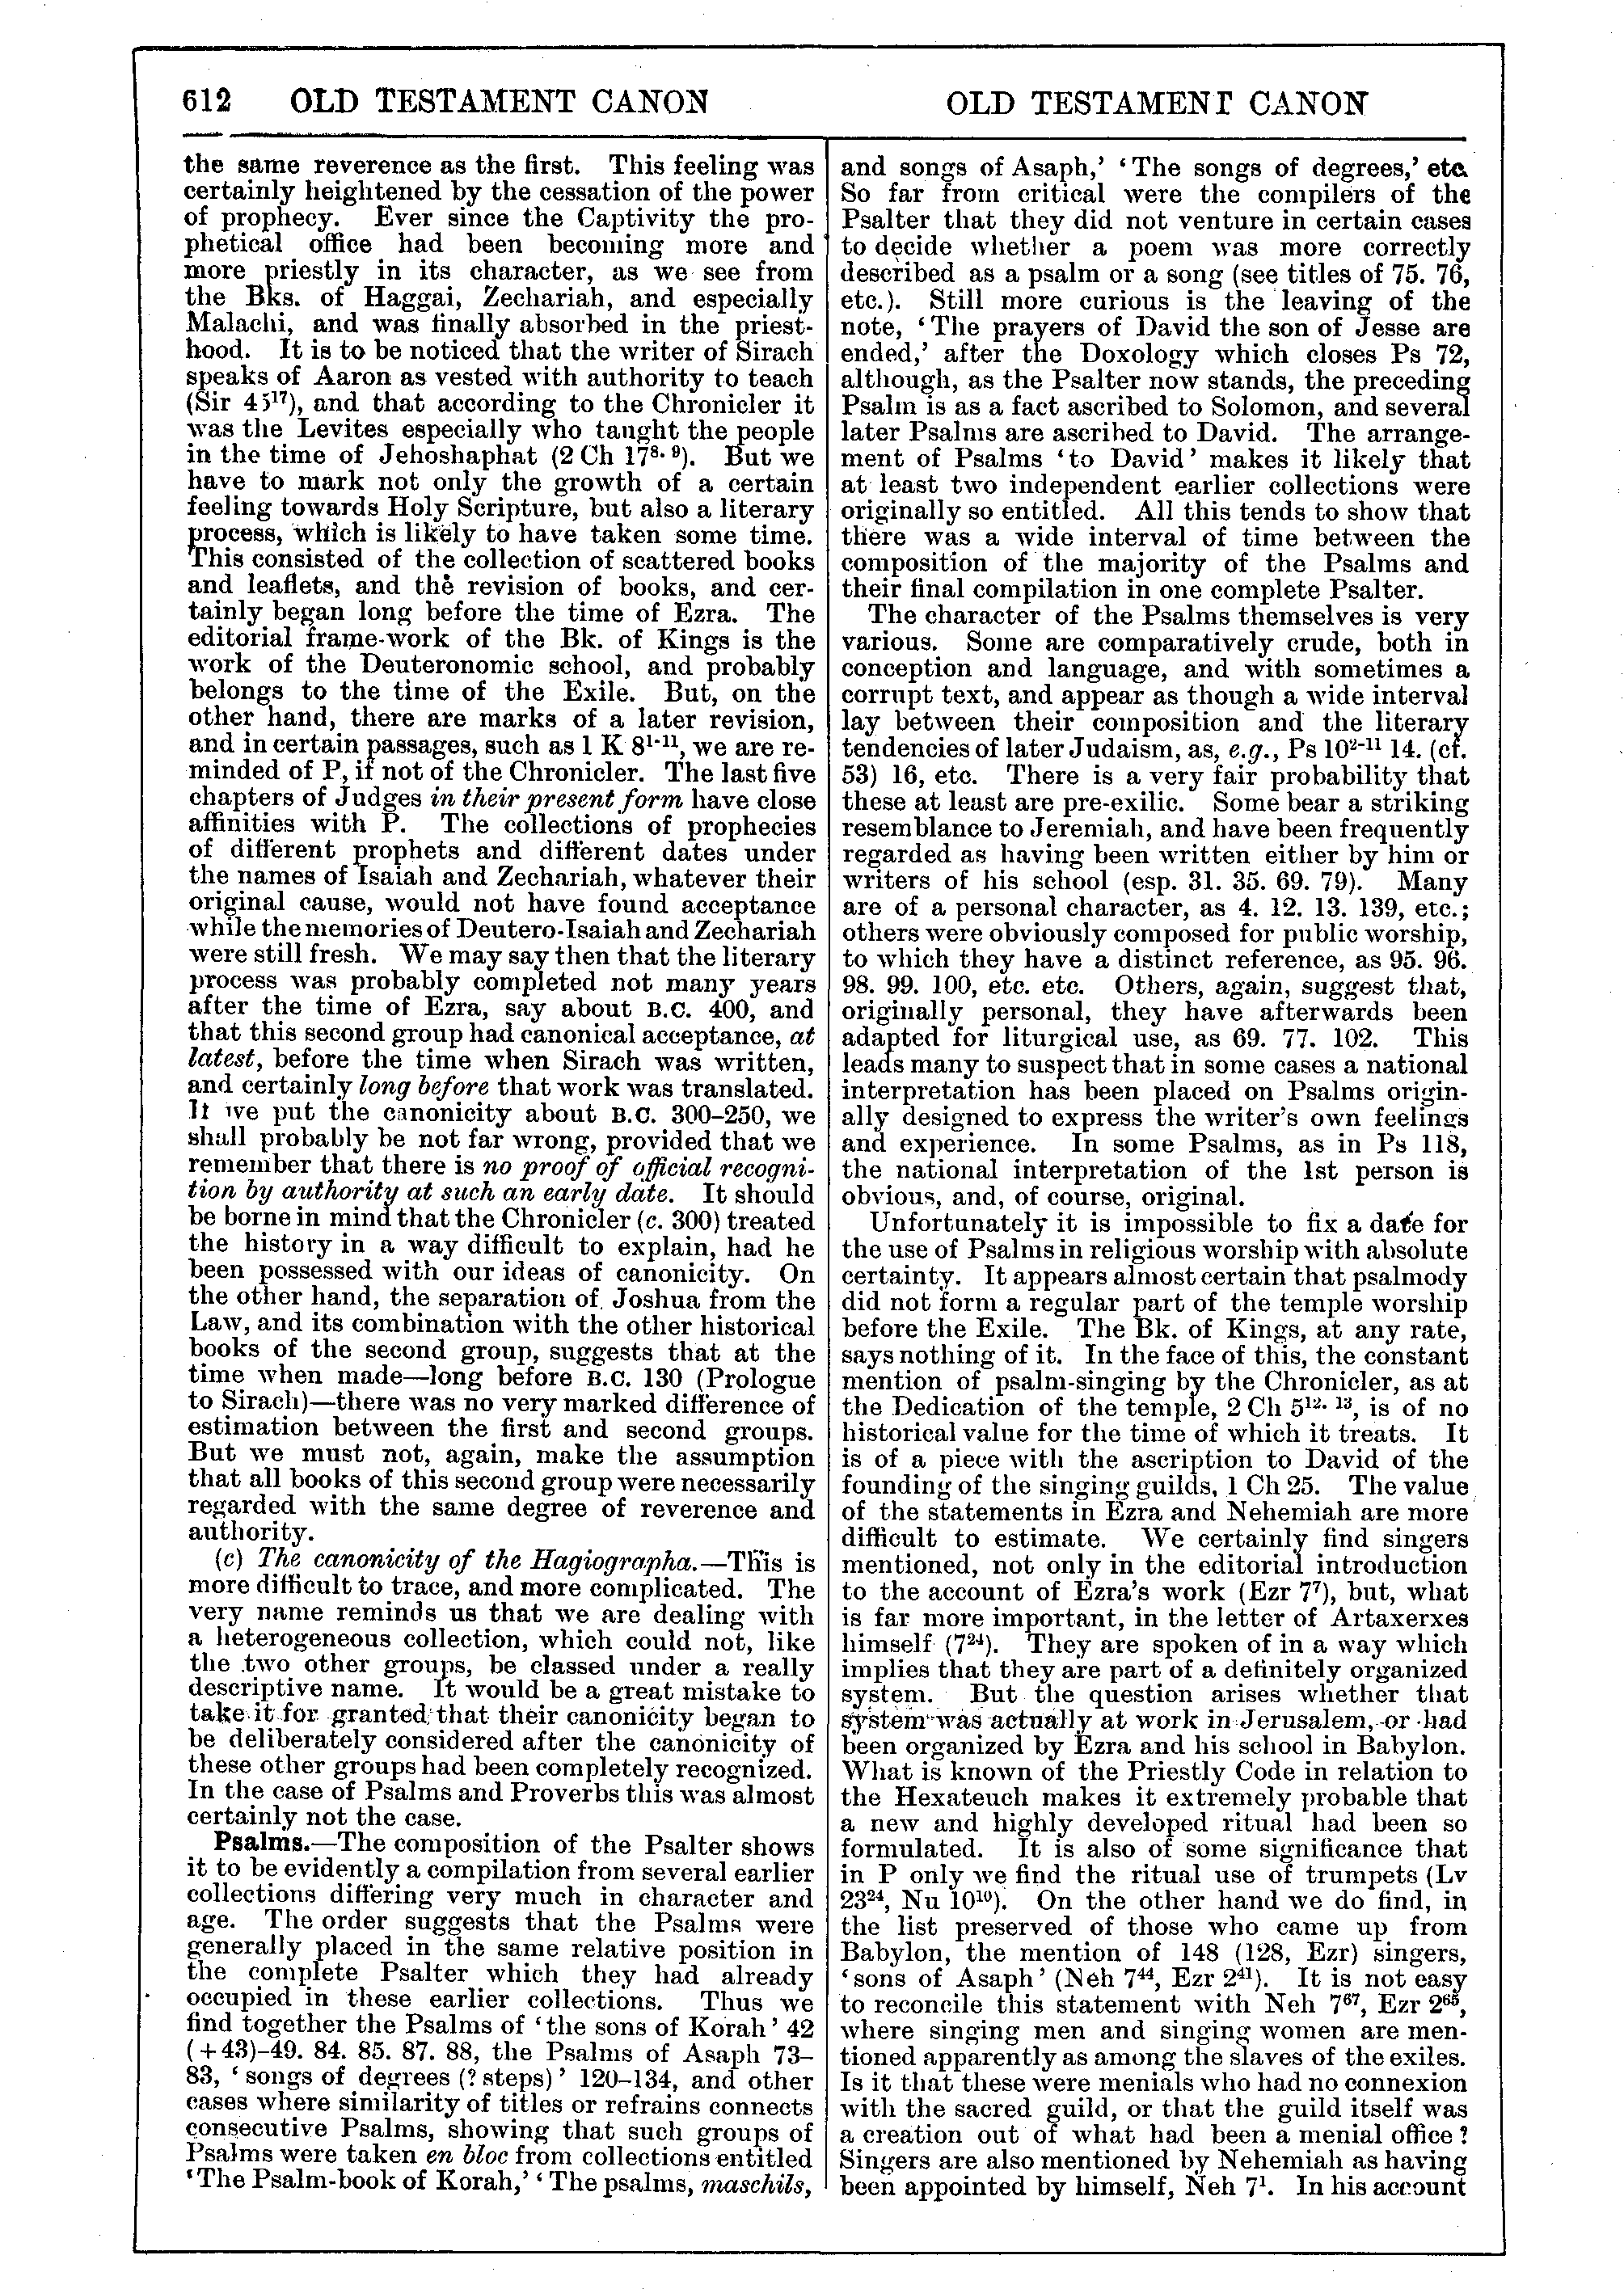 Image of page 612